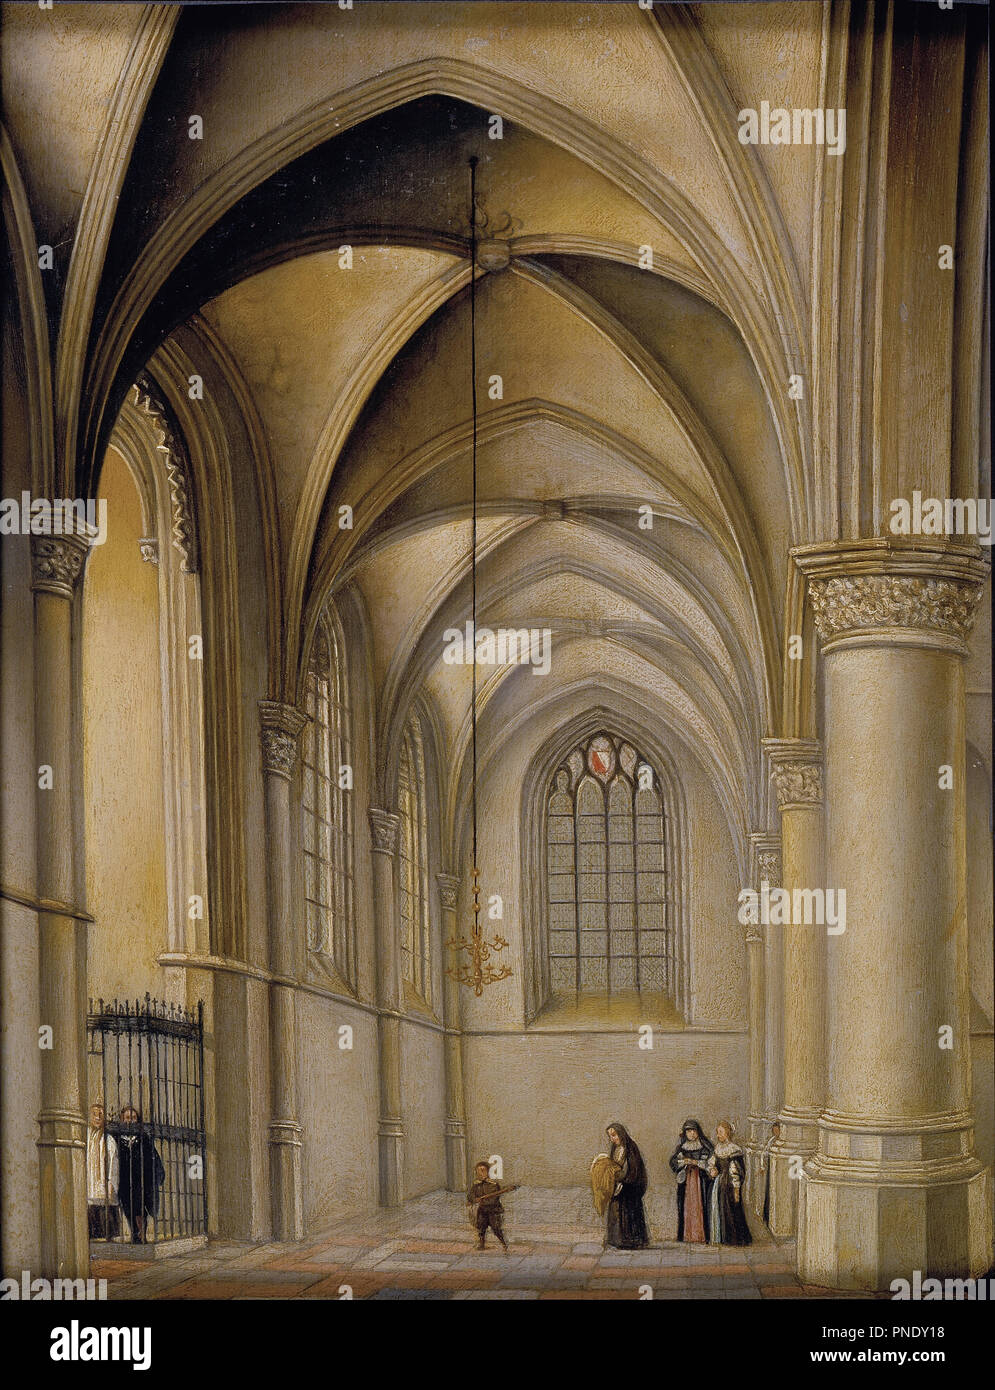 Church Interior. Date/Period: 17th century (original dated 1633). Painting. Oil on panel Oil. Height: 429 mm (16.88 in); Width: 335 mm (13.18 in). Author: After Saenredam, Pieter Jansz. Pieter Jansz. Saenredam. Stock Photo